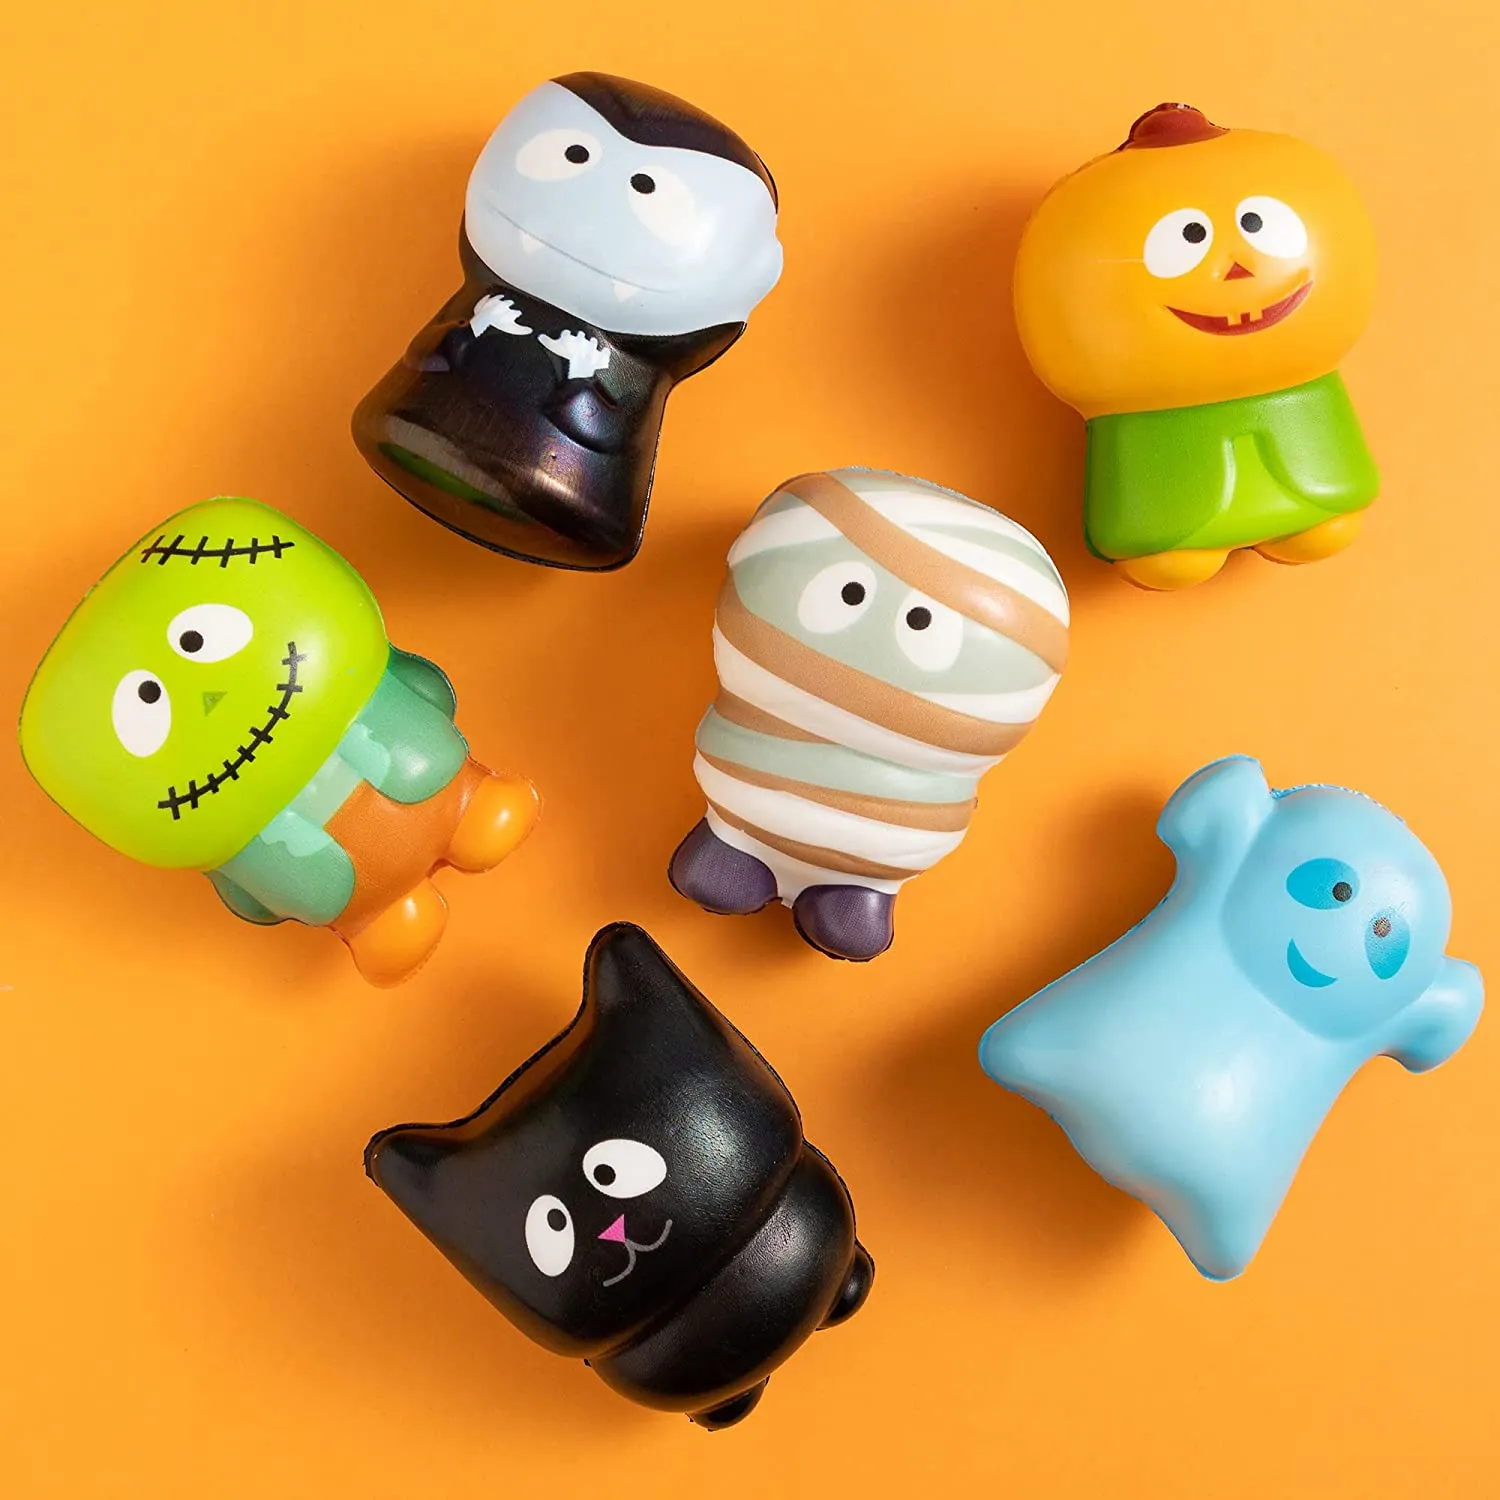 AMUTOY 6PCS Jumbo Halloween Squishy Toys Set,6 Halloween Theme Designs Slow Rising Stress Relief Toys for Kids Adults,Classroom Prizes,Goodie Bag Fillers,Trick or Treat Halloween Party Favors/Toy/Gift 